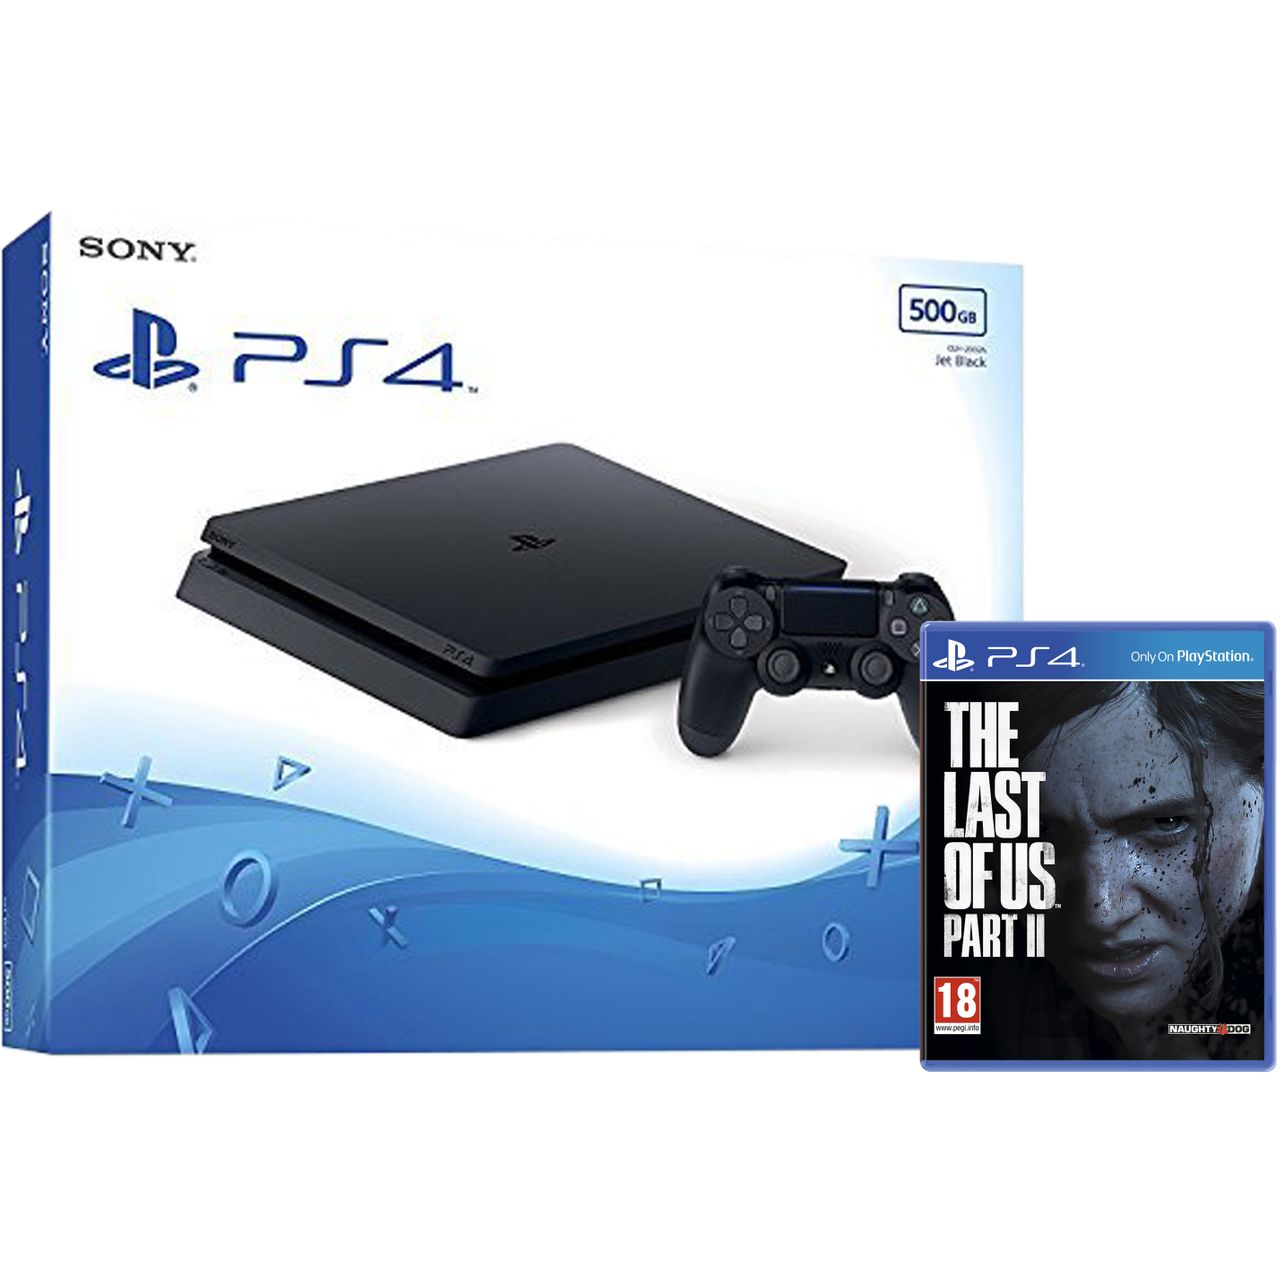 PlayStation 4 500GB with The Last Of Us Part 2 (Disc) Review